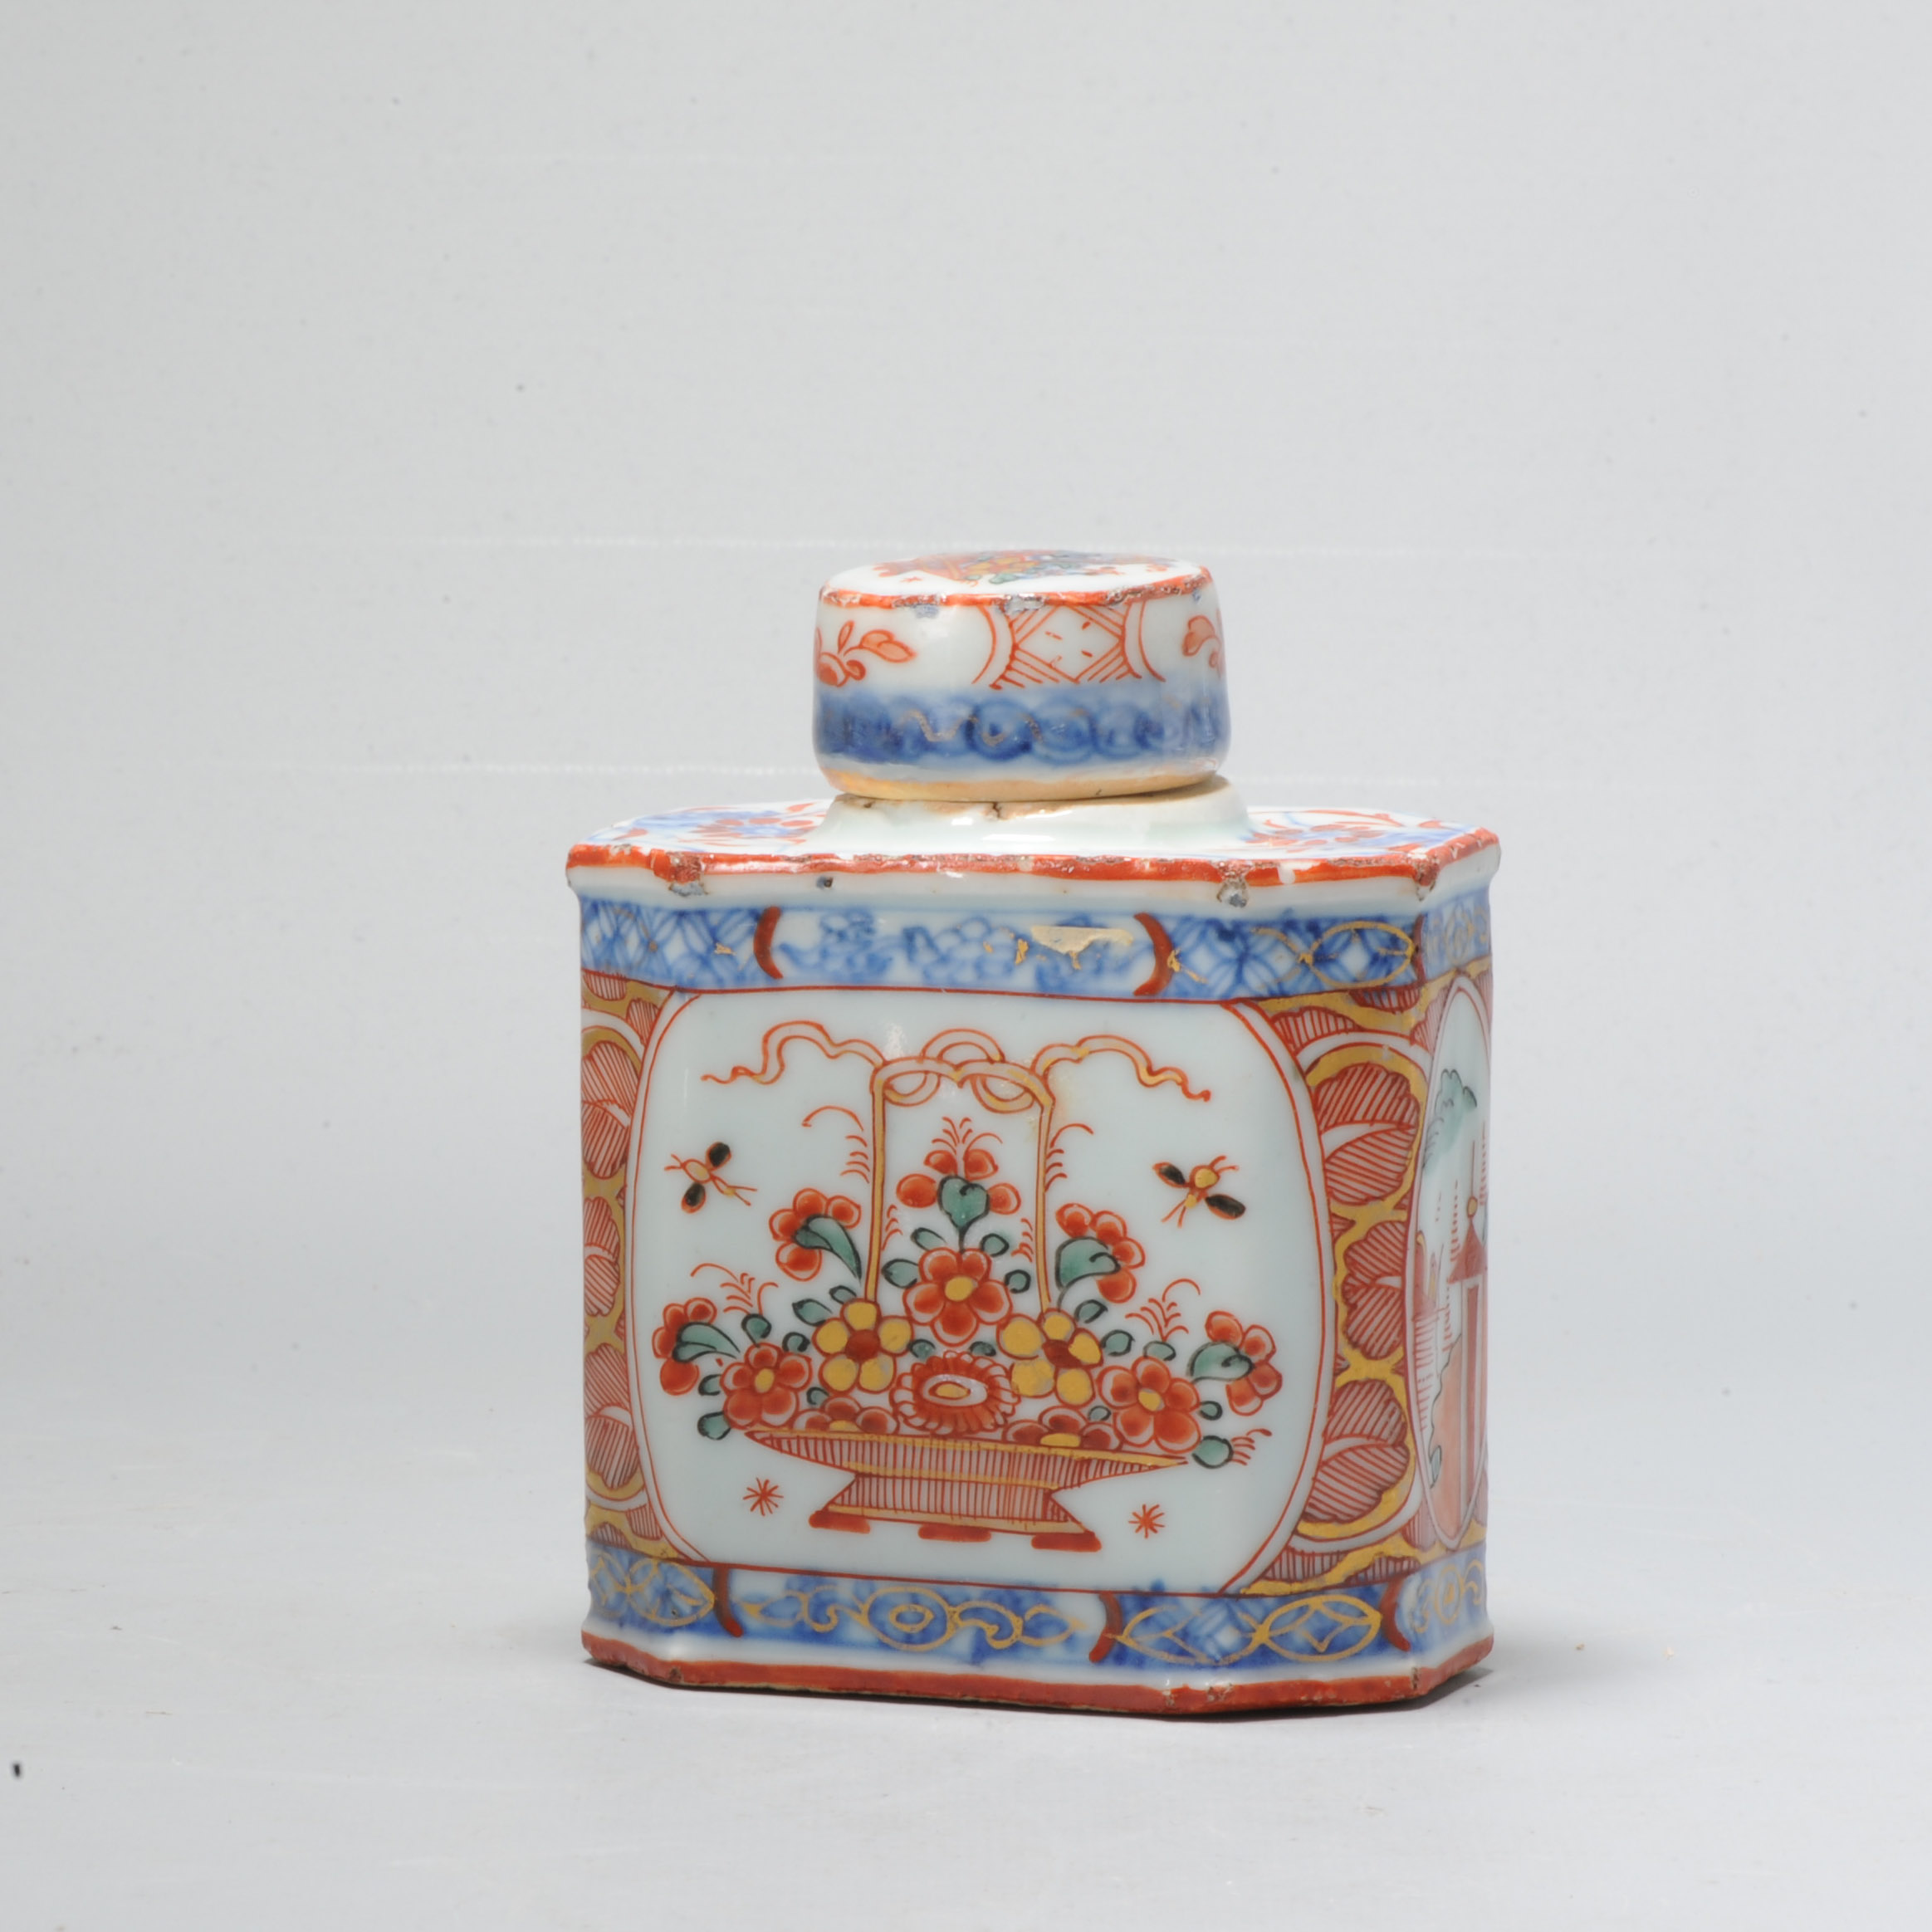 1056 Very nice Chinese Tea Caddy. Repainted in Holland. Amsterdam Bont